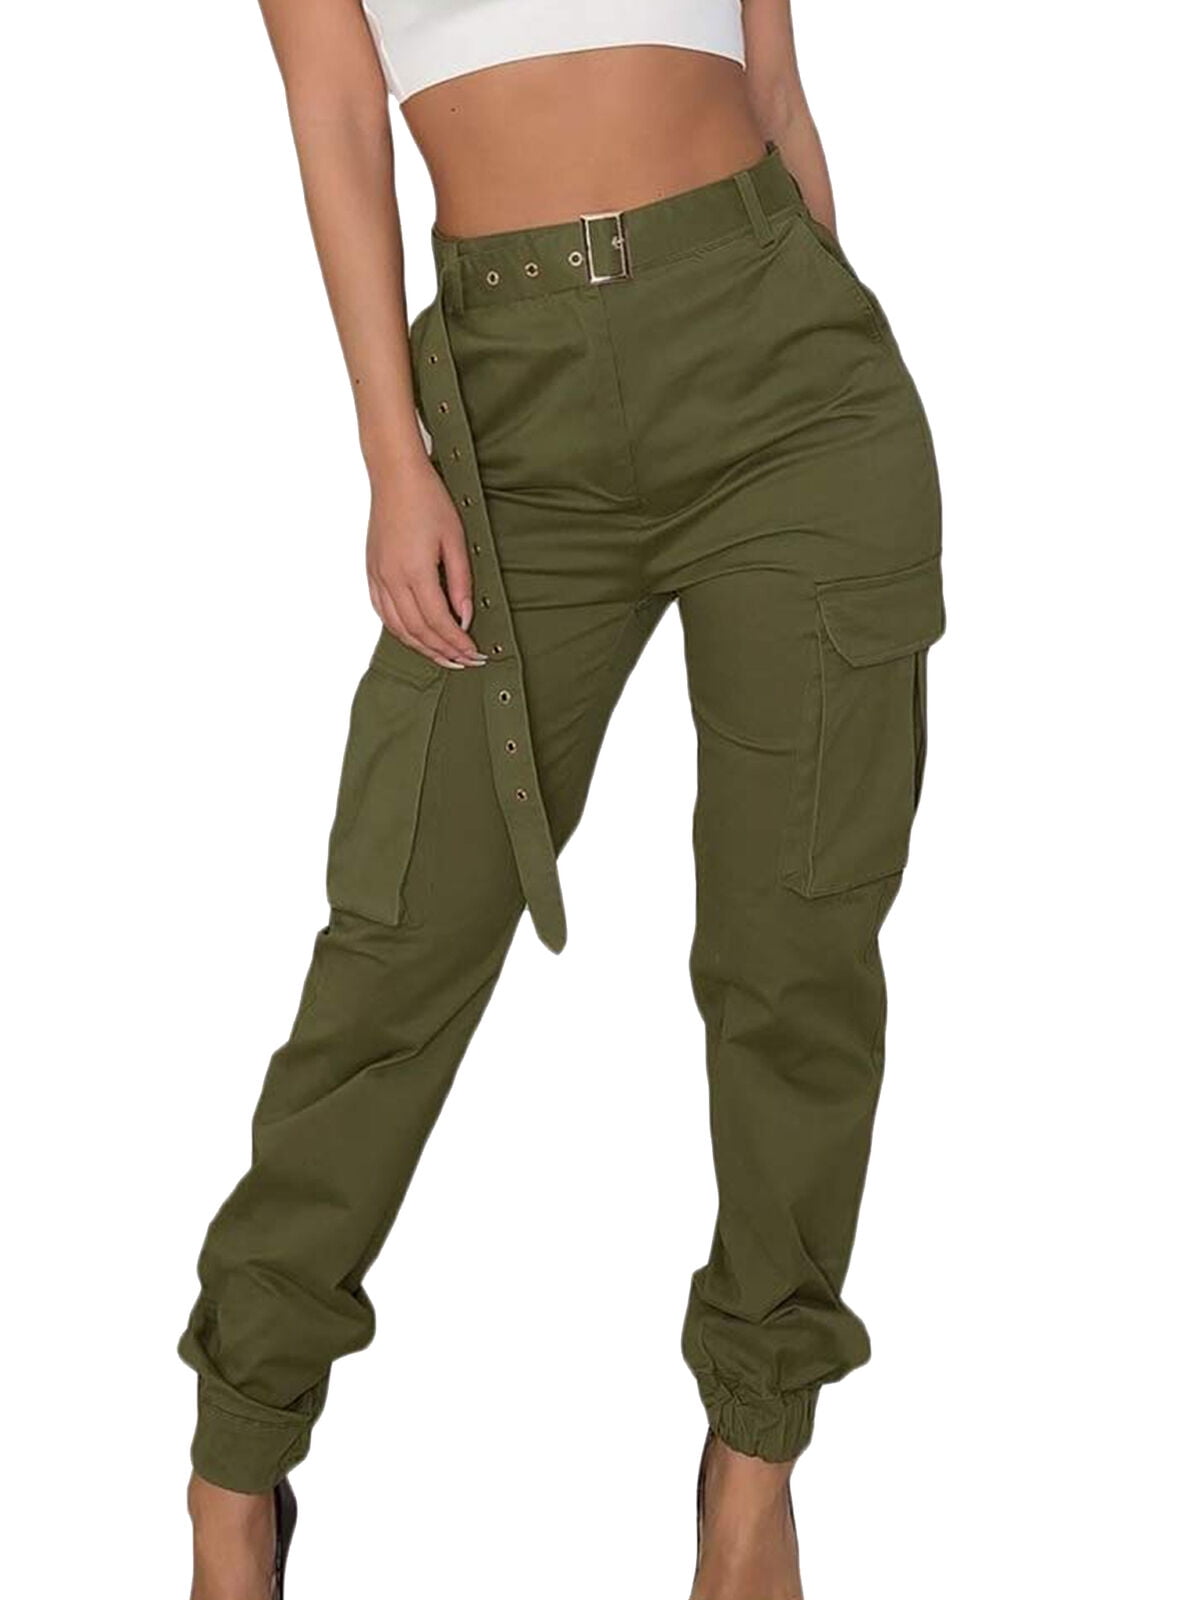 wsevypo Women Sports Casual High Waist Military Combat Loose Fit Cargo ...